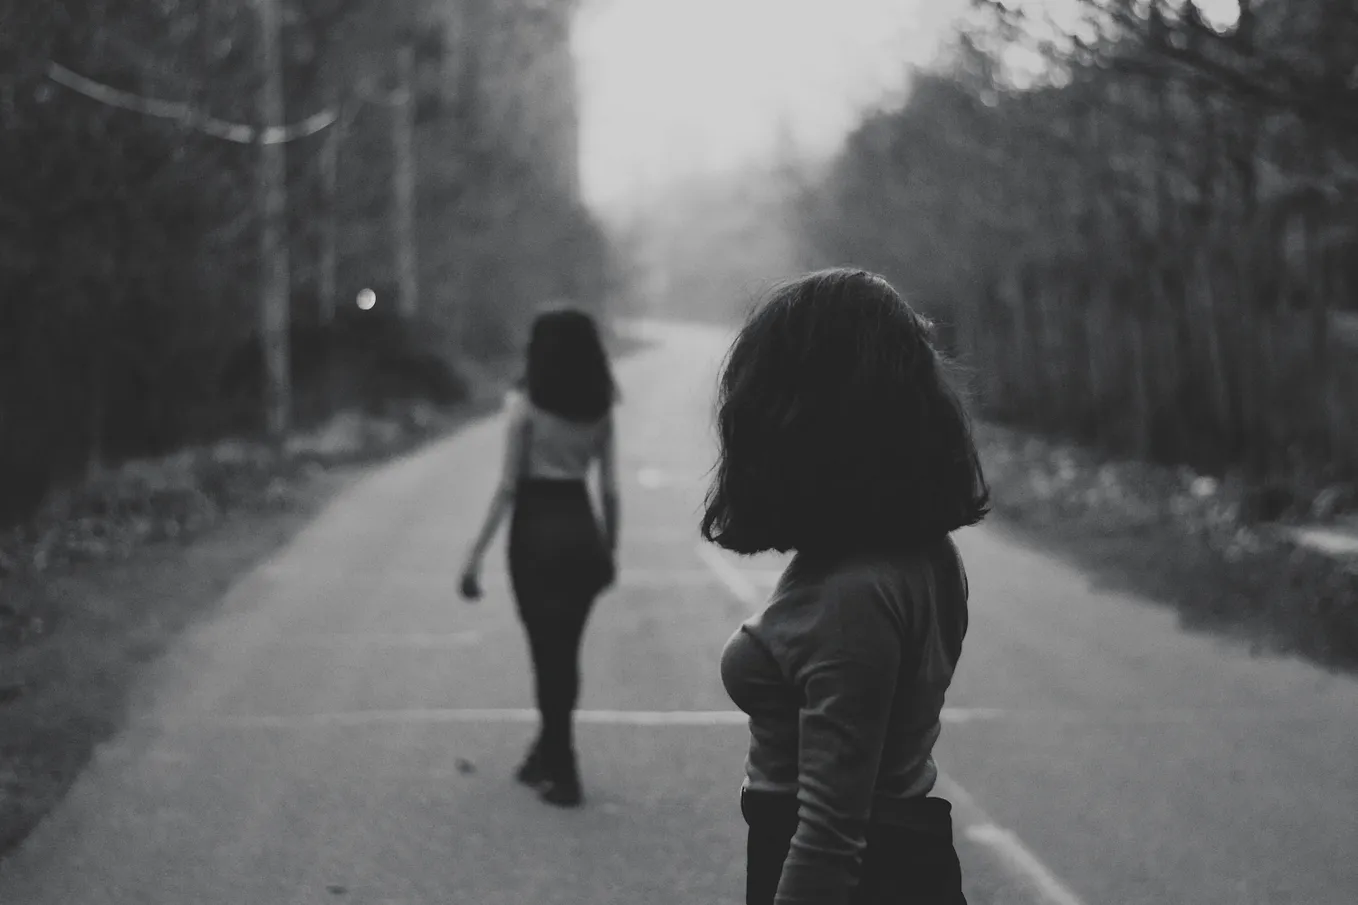 A young woman is looking back over her shoulder at another young woman who is walking away down an open road.